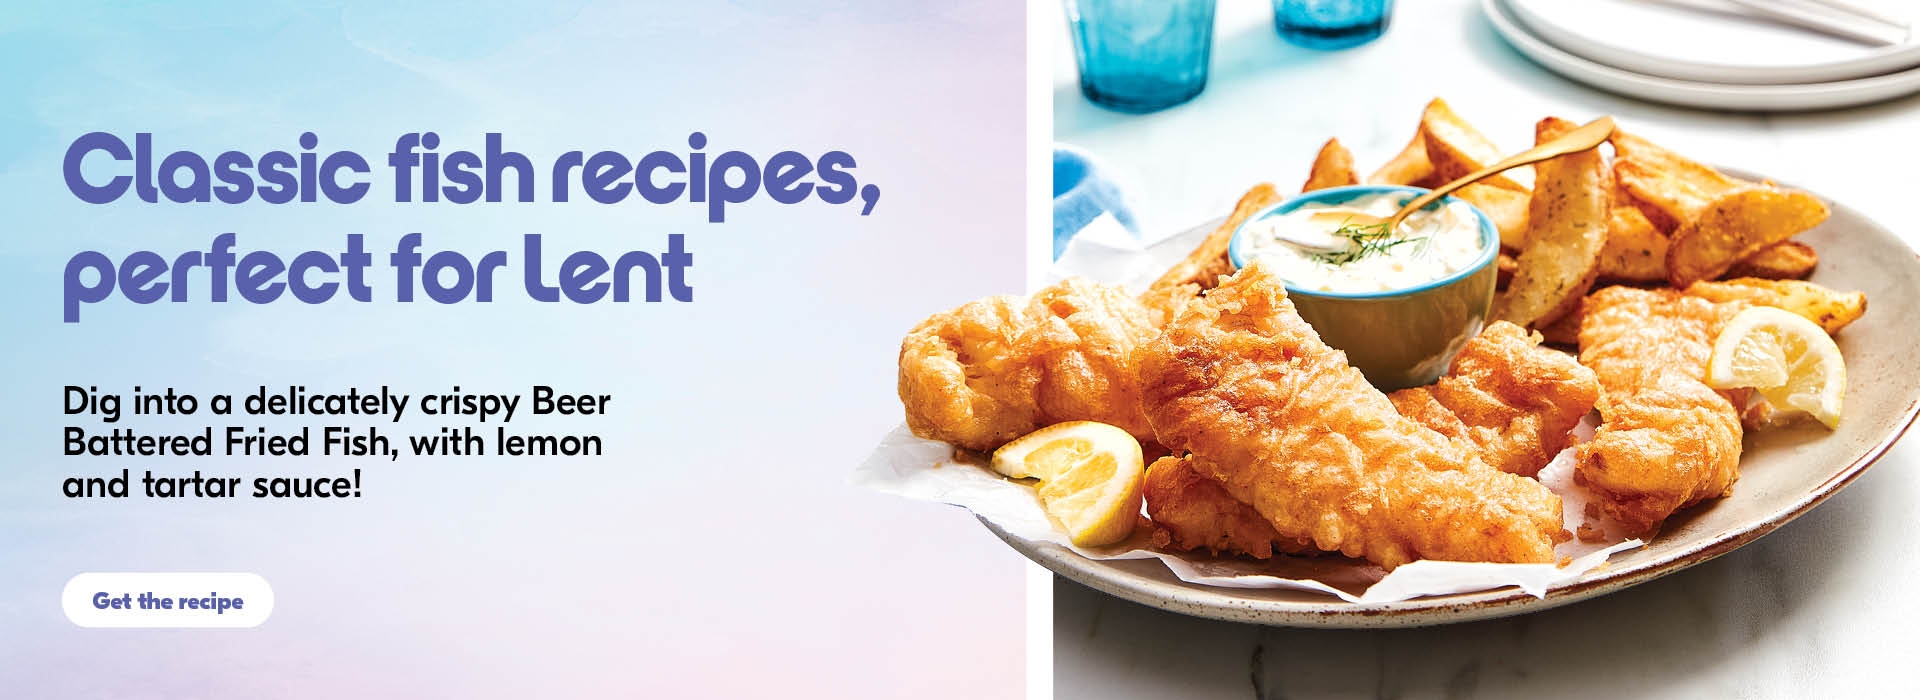 The following image contains the text, "Classic fish recipes perfect for lent; Dig into a delicately crispy beer battered fried fish with lemon and tartar sauce, along with get the recipe button."